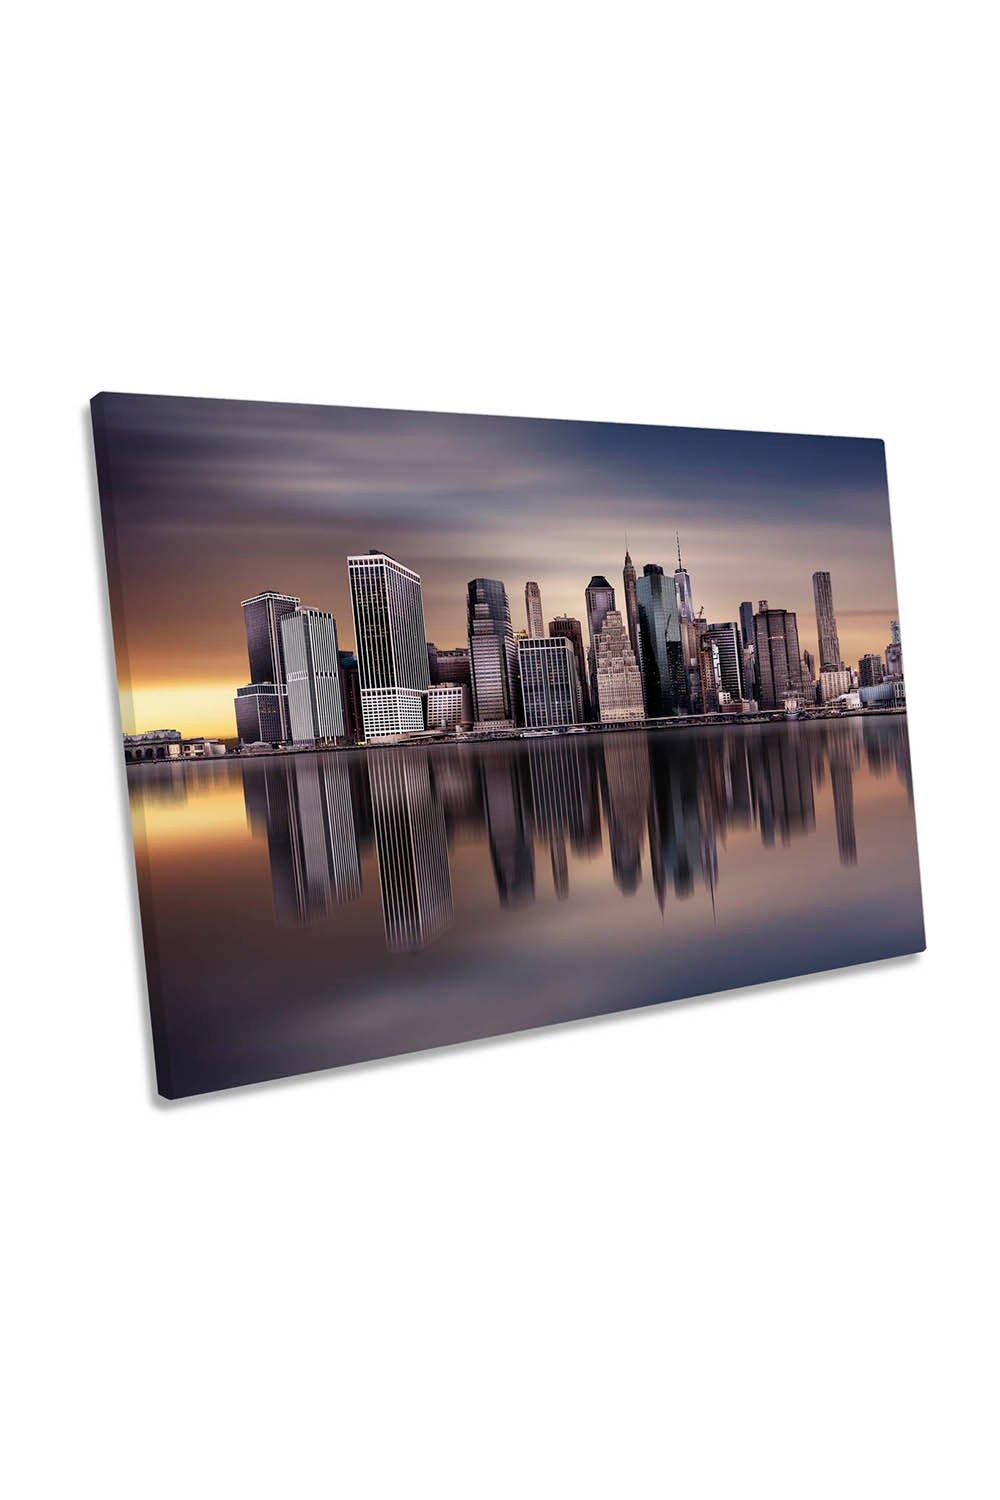 New York City Manhattan Skyscrapers Canvas Wall Art Picture Print